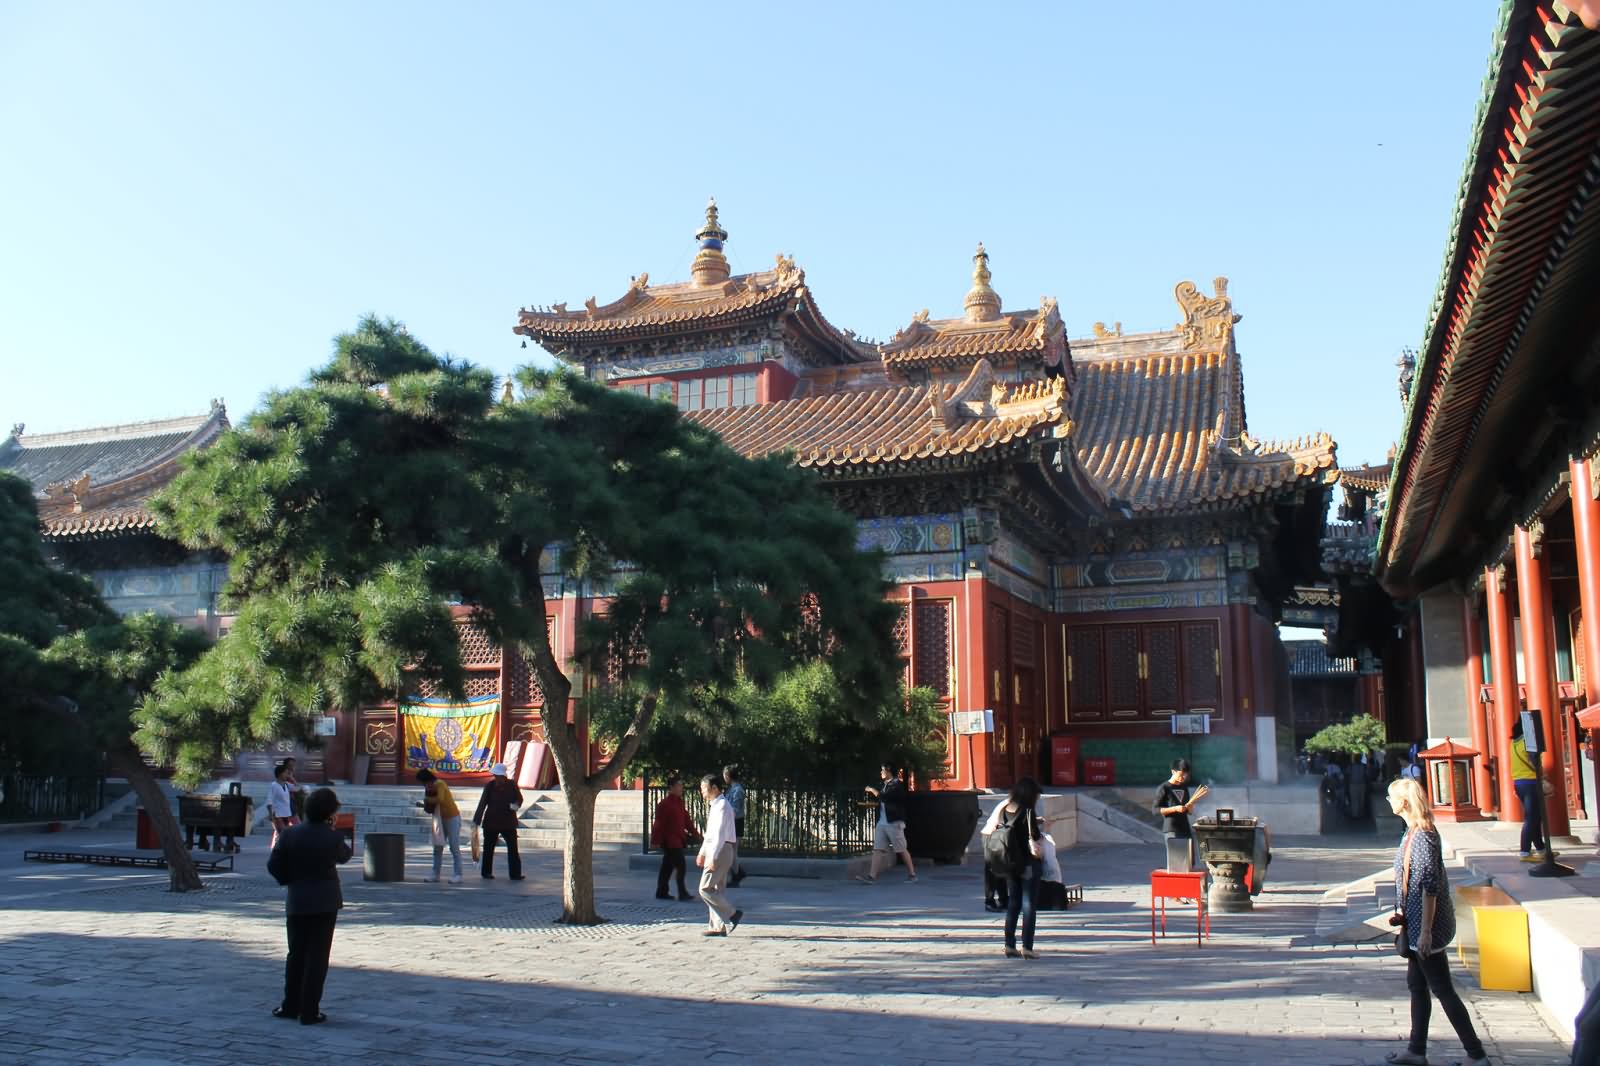 The Yonghe Temple Courtyard